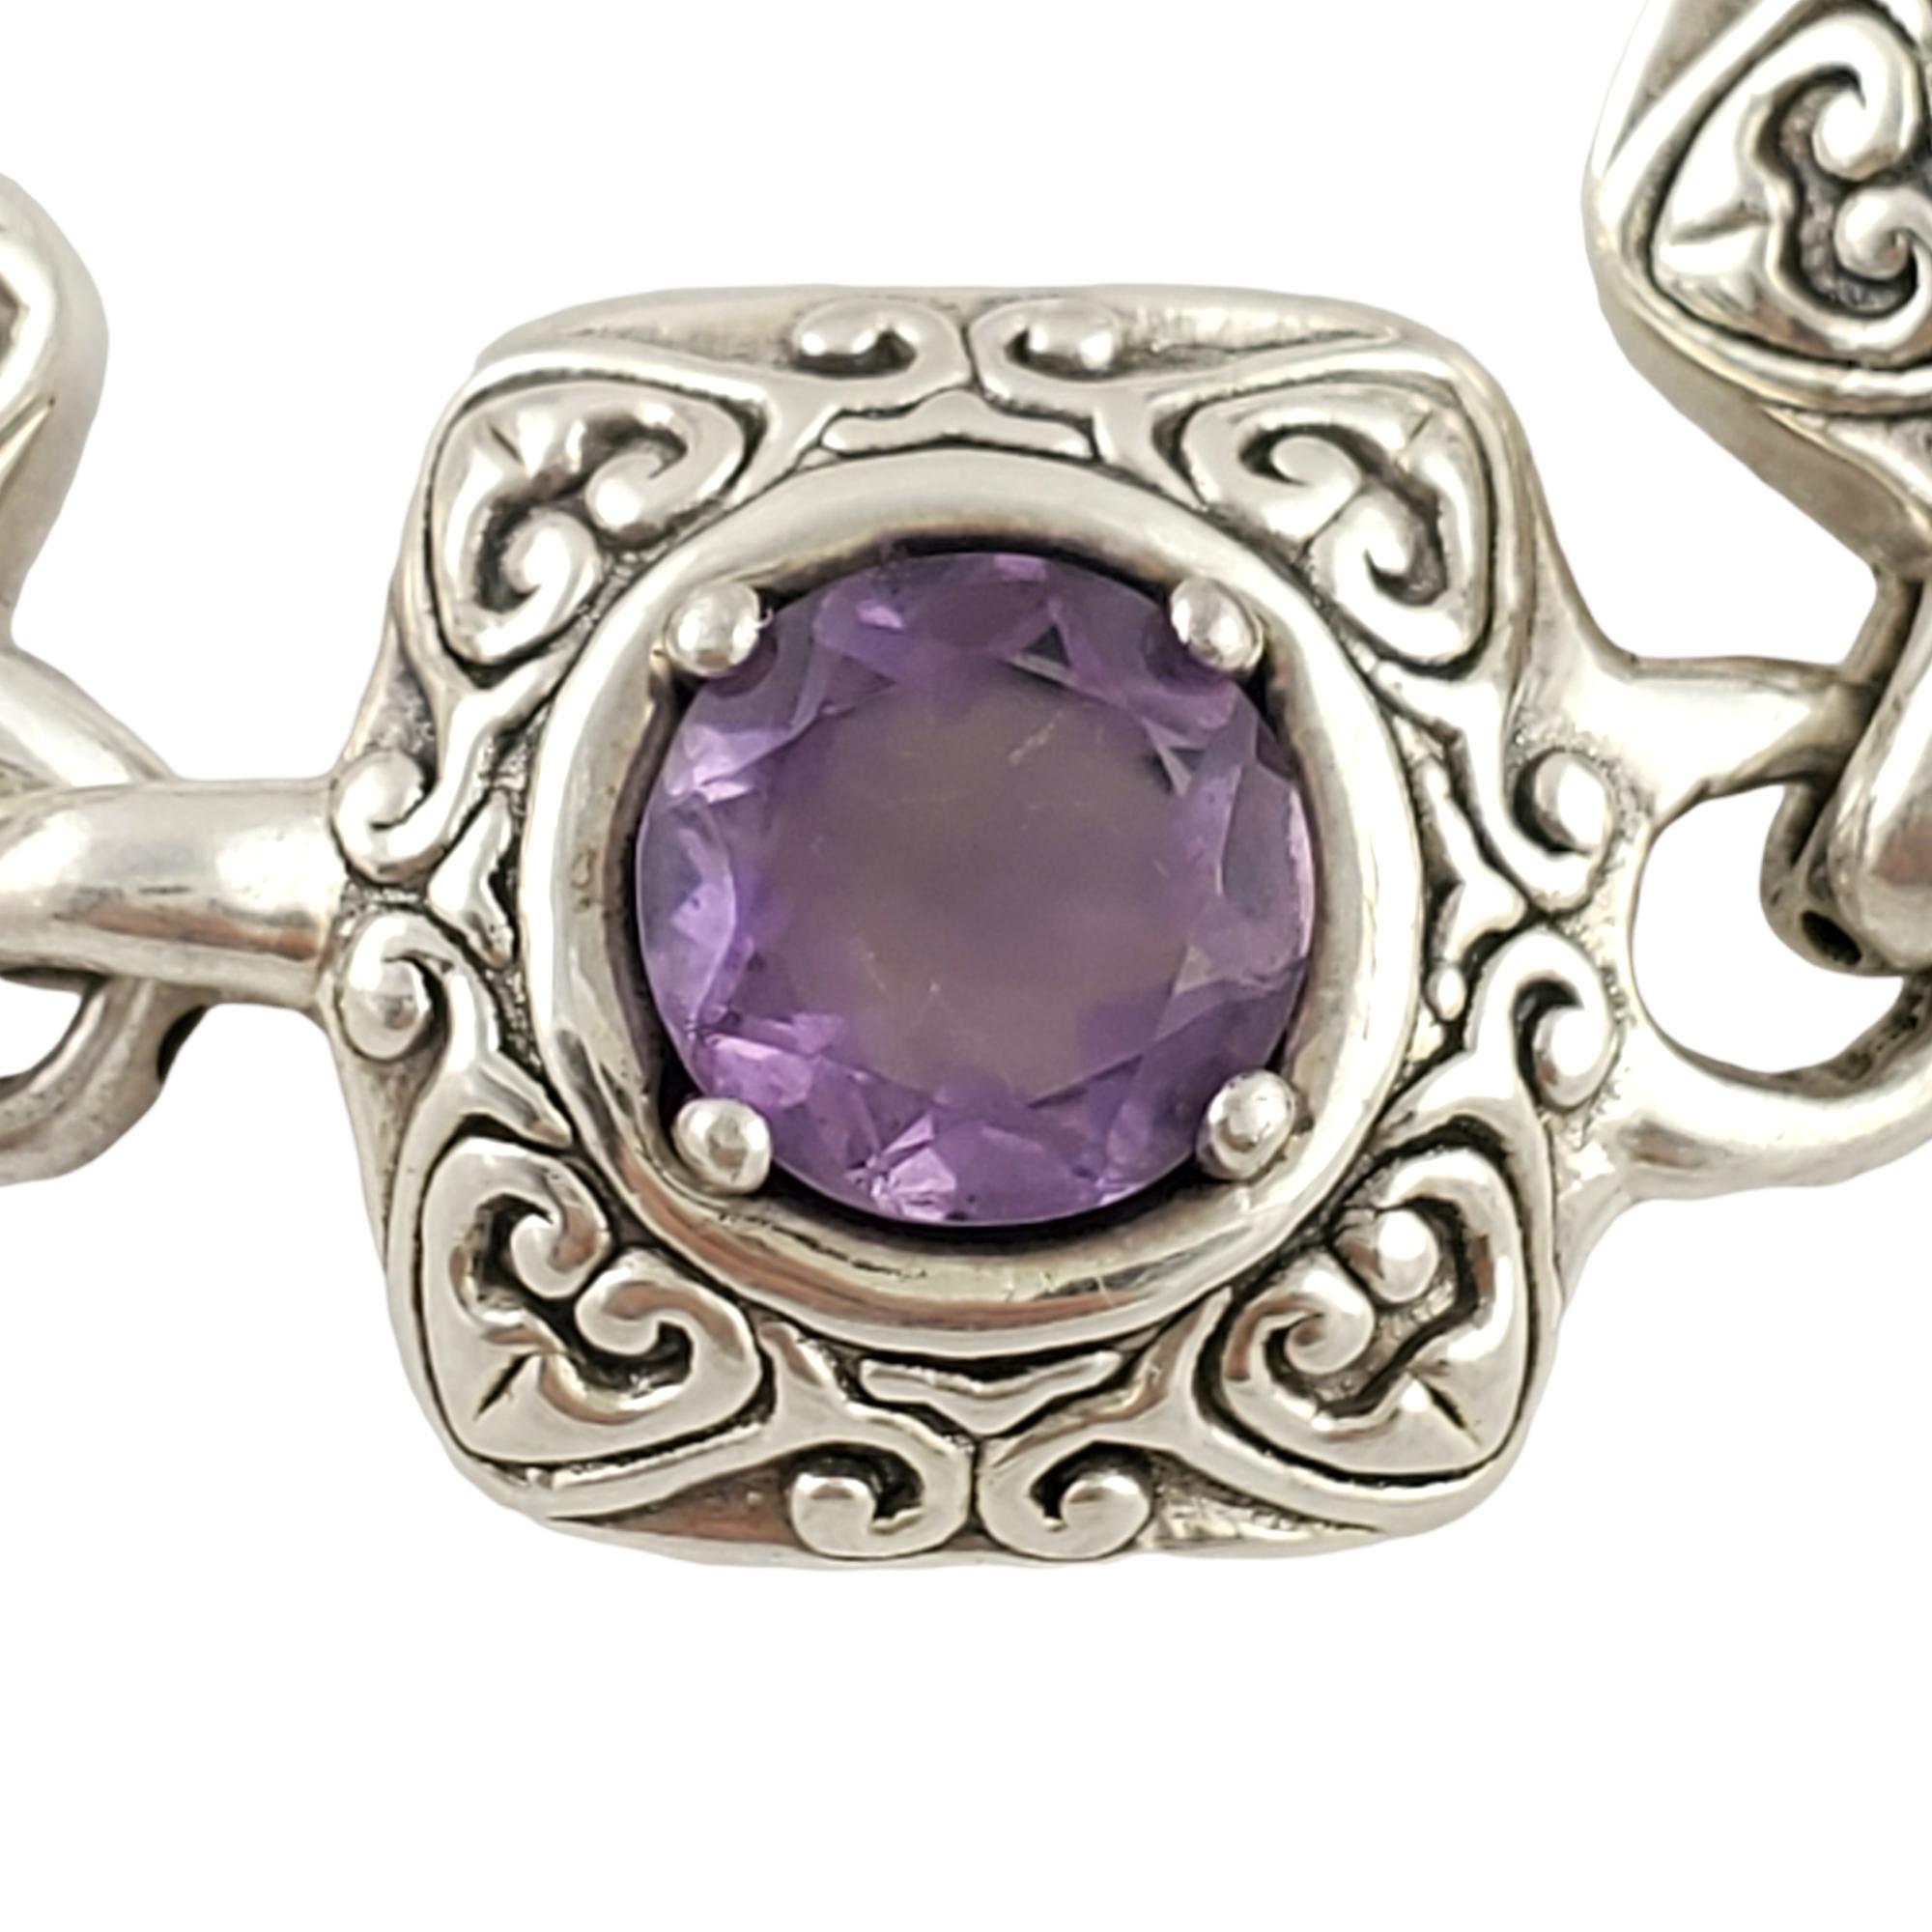 BJC Sterling Silver Amethyst Bracelet

This is a beautiful sterling silver purple amethyst bracelet by BJC.

Measurements:  Bracelet measures 6 1/2 inches long, 6 mm in thickness.  Stones measures approx.

8 mm L x 8 mm W.

Weight:  19.1 dwt / 29.7